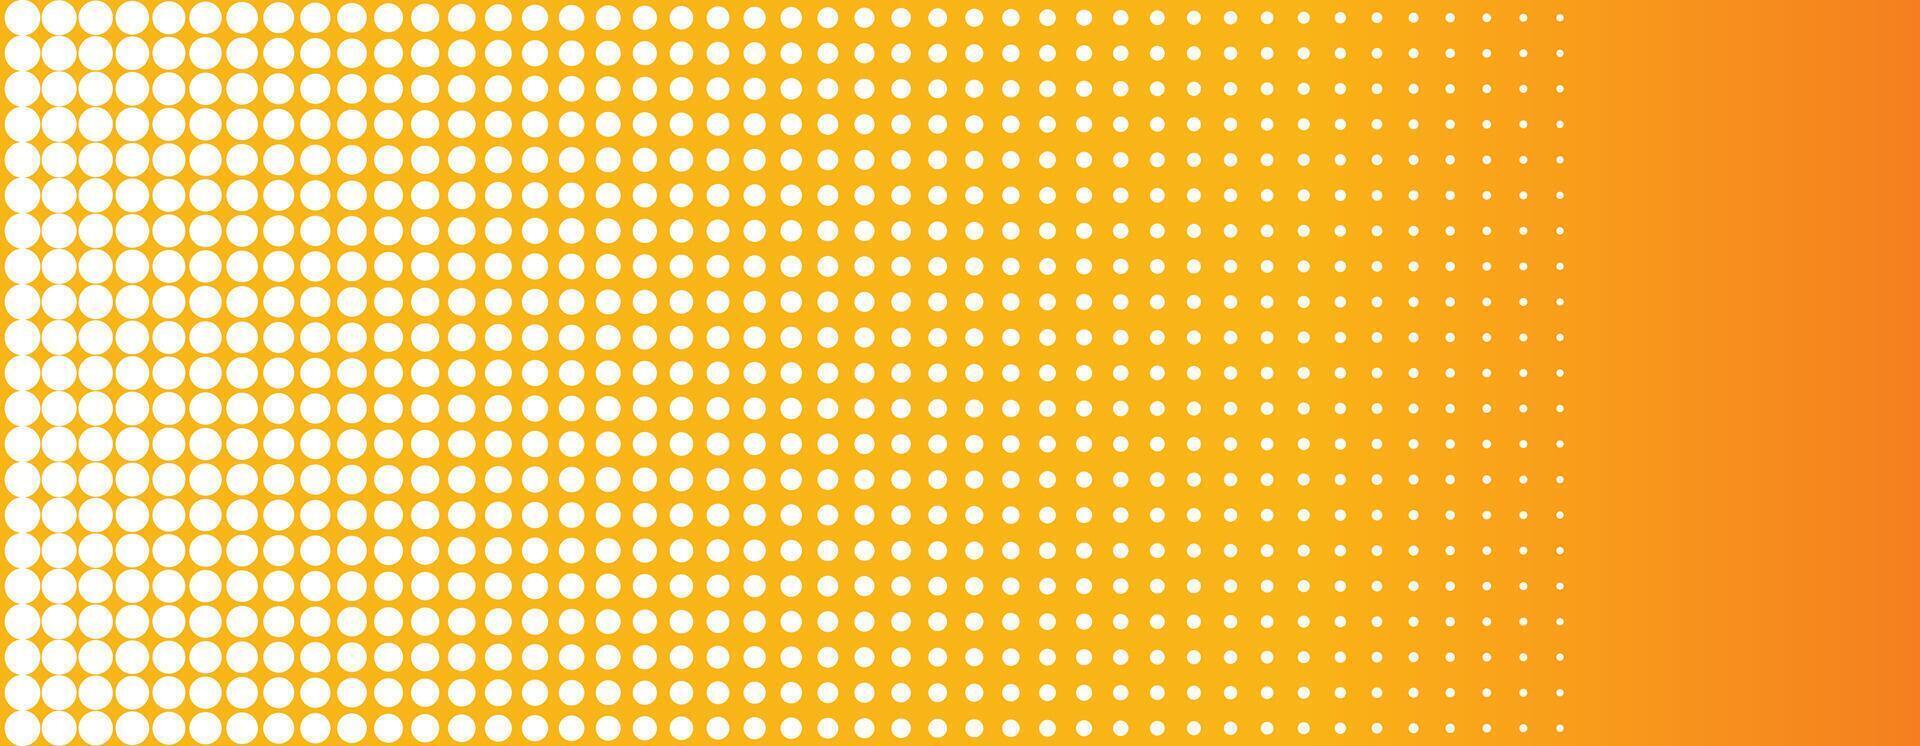 abstract yellow and white halftone wide banner vector